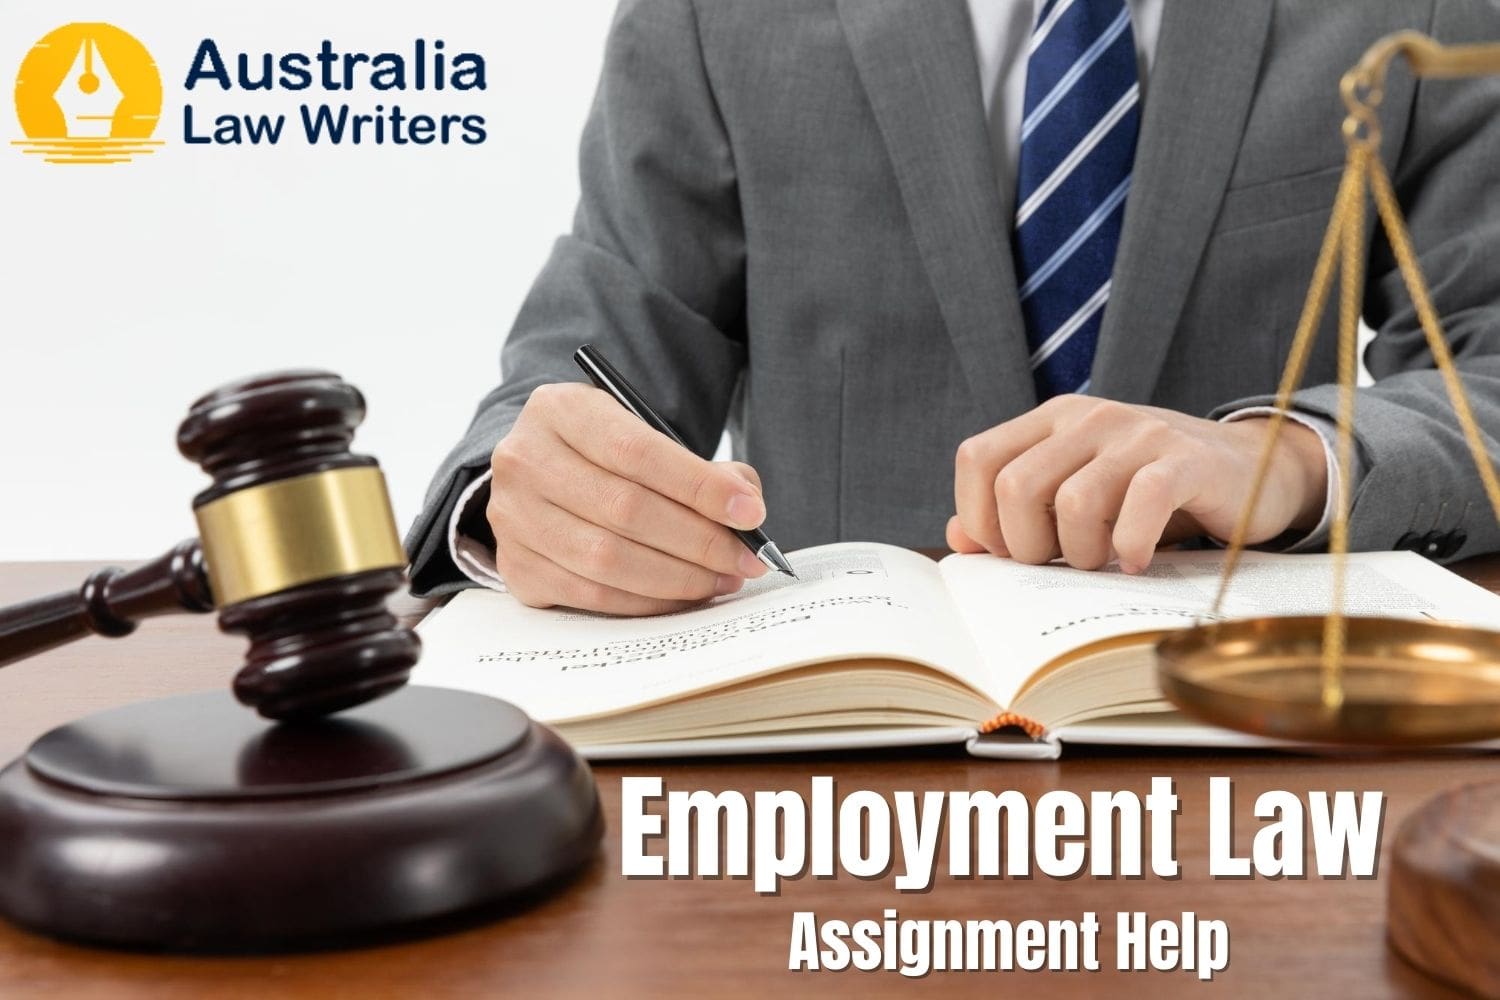 Offering the most exhaustive assistance with Employment Law Assignments